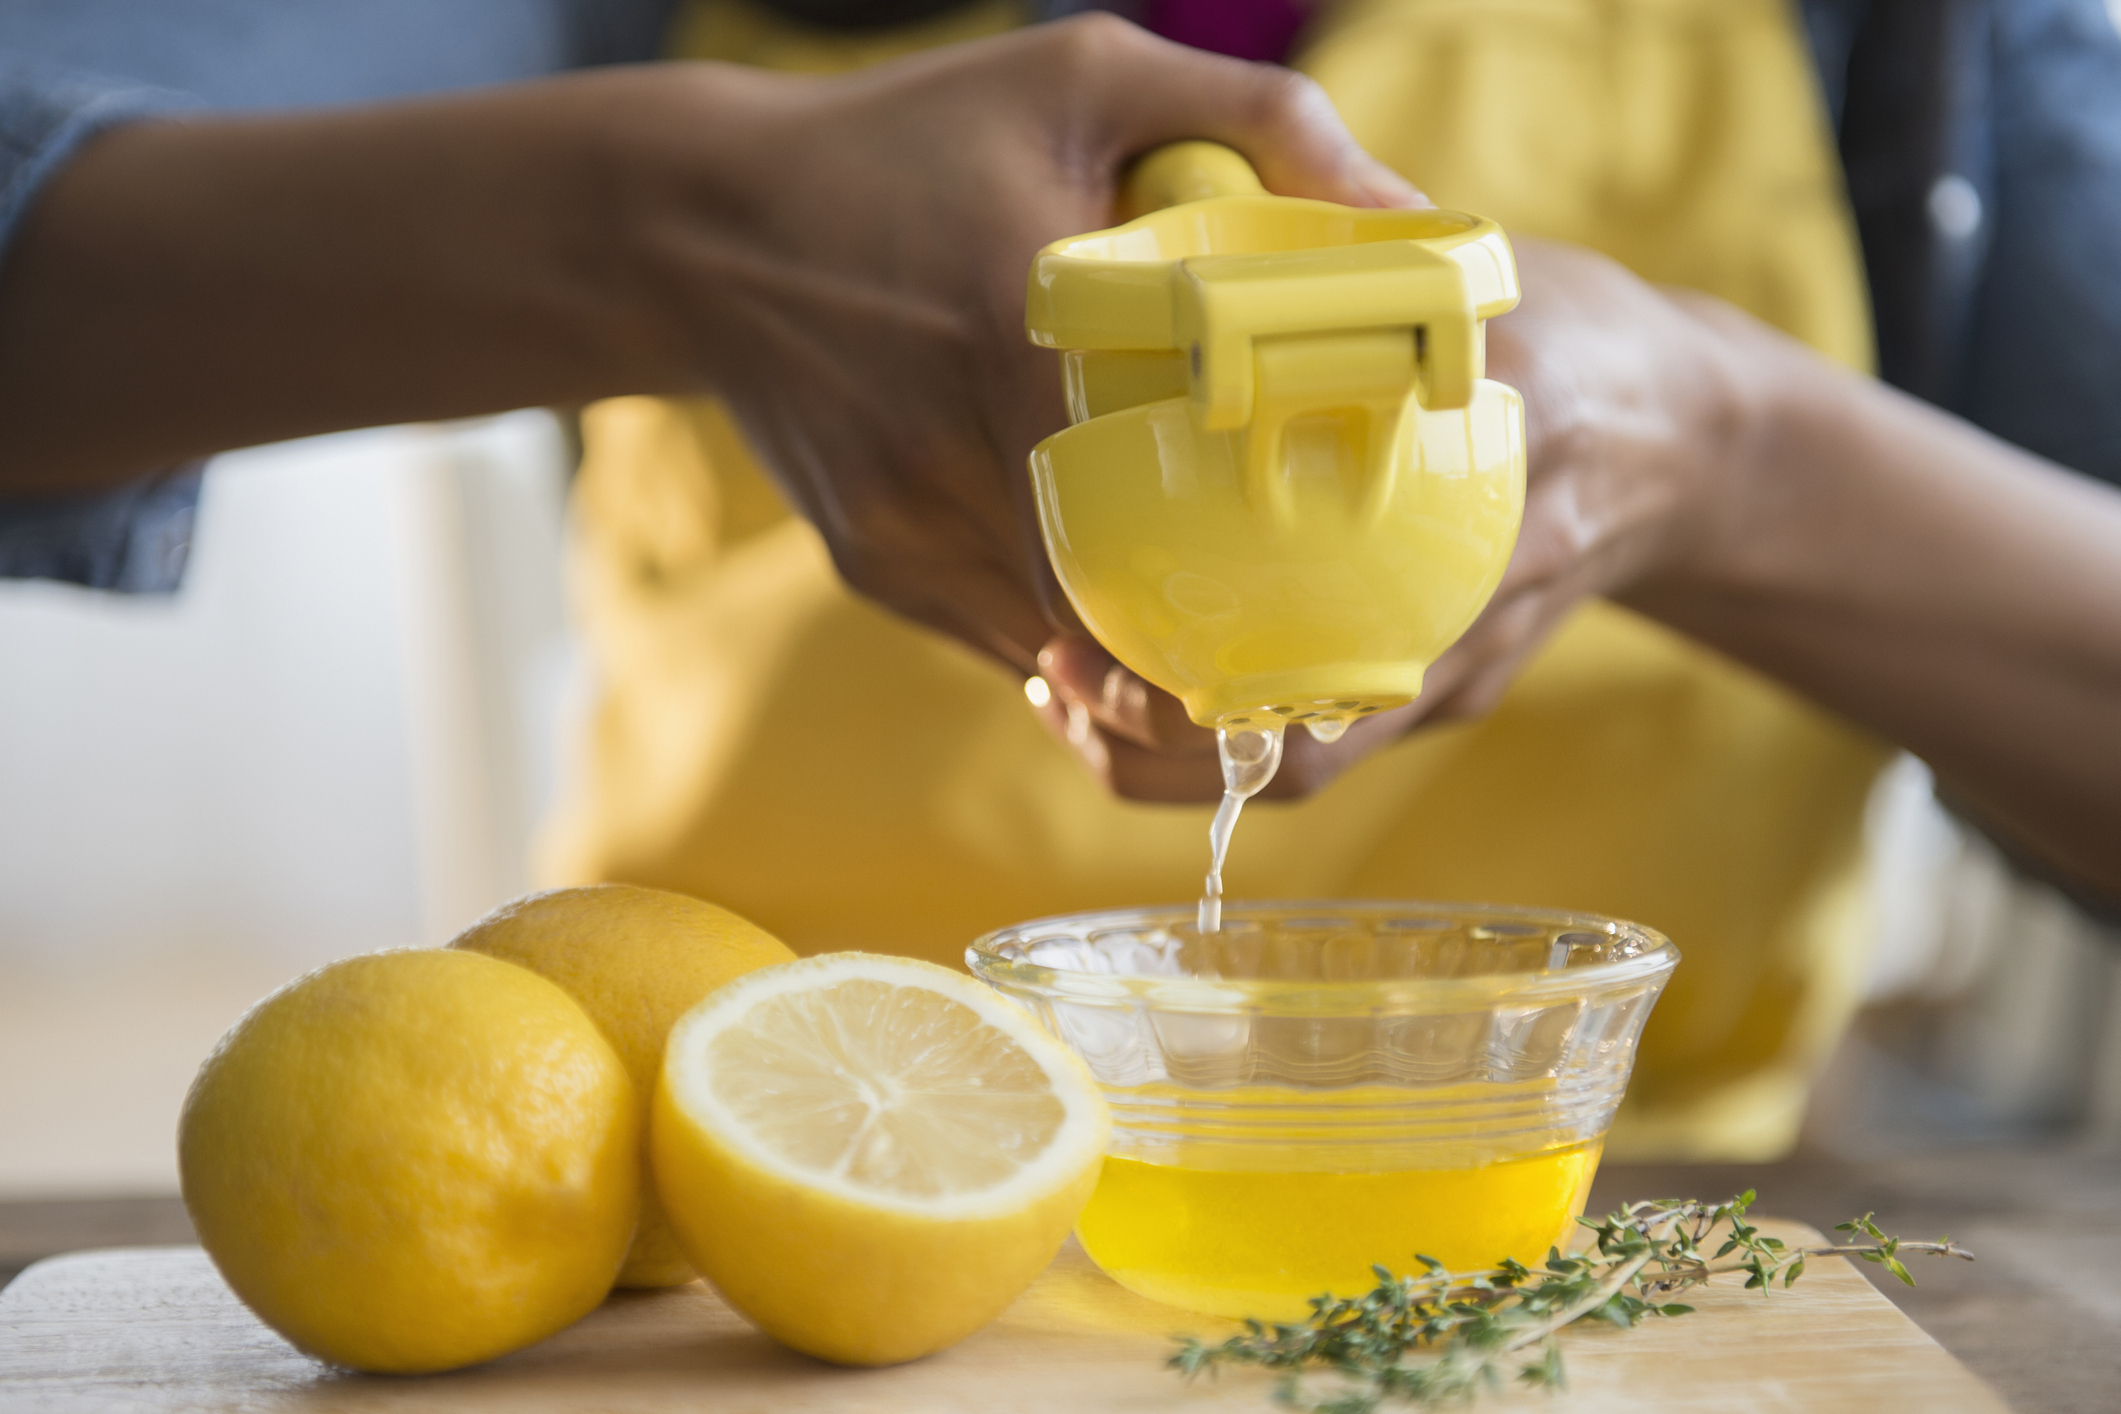 a woman squeezing the juice out of a lemon